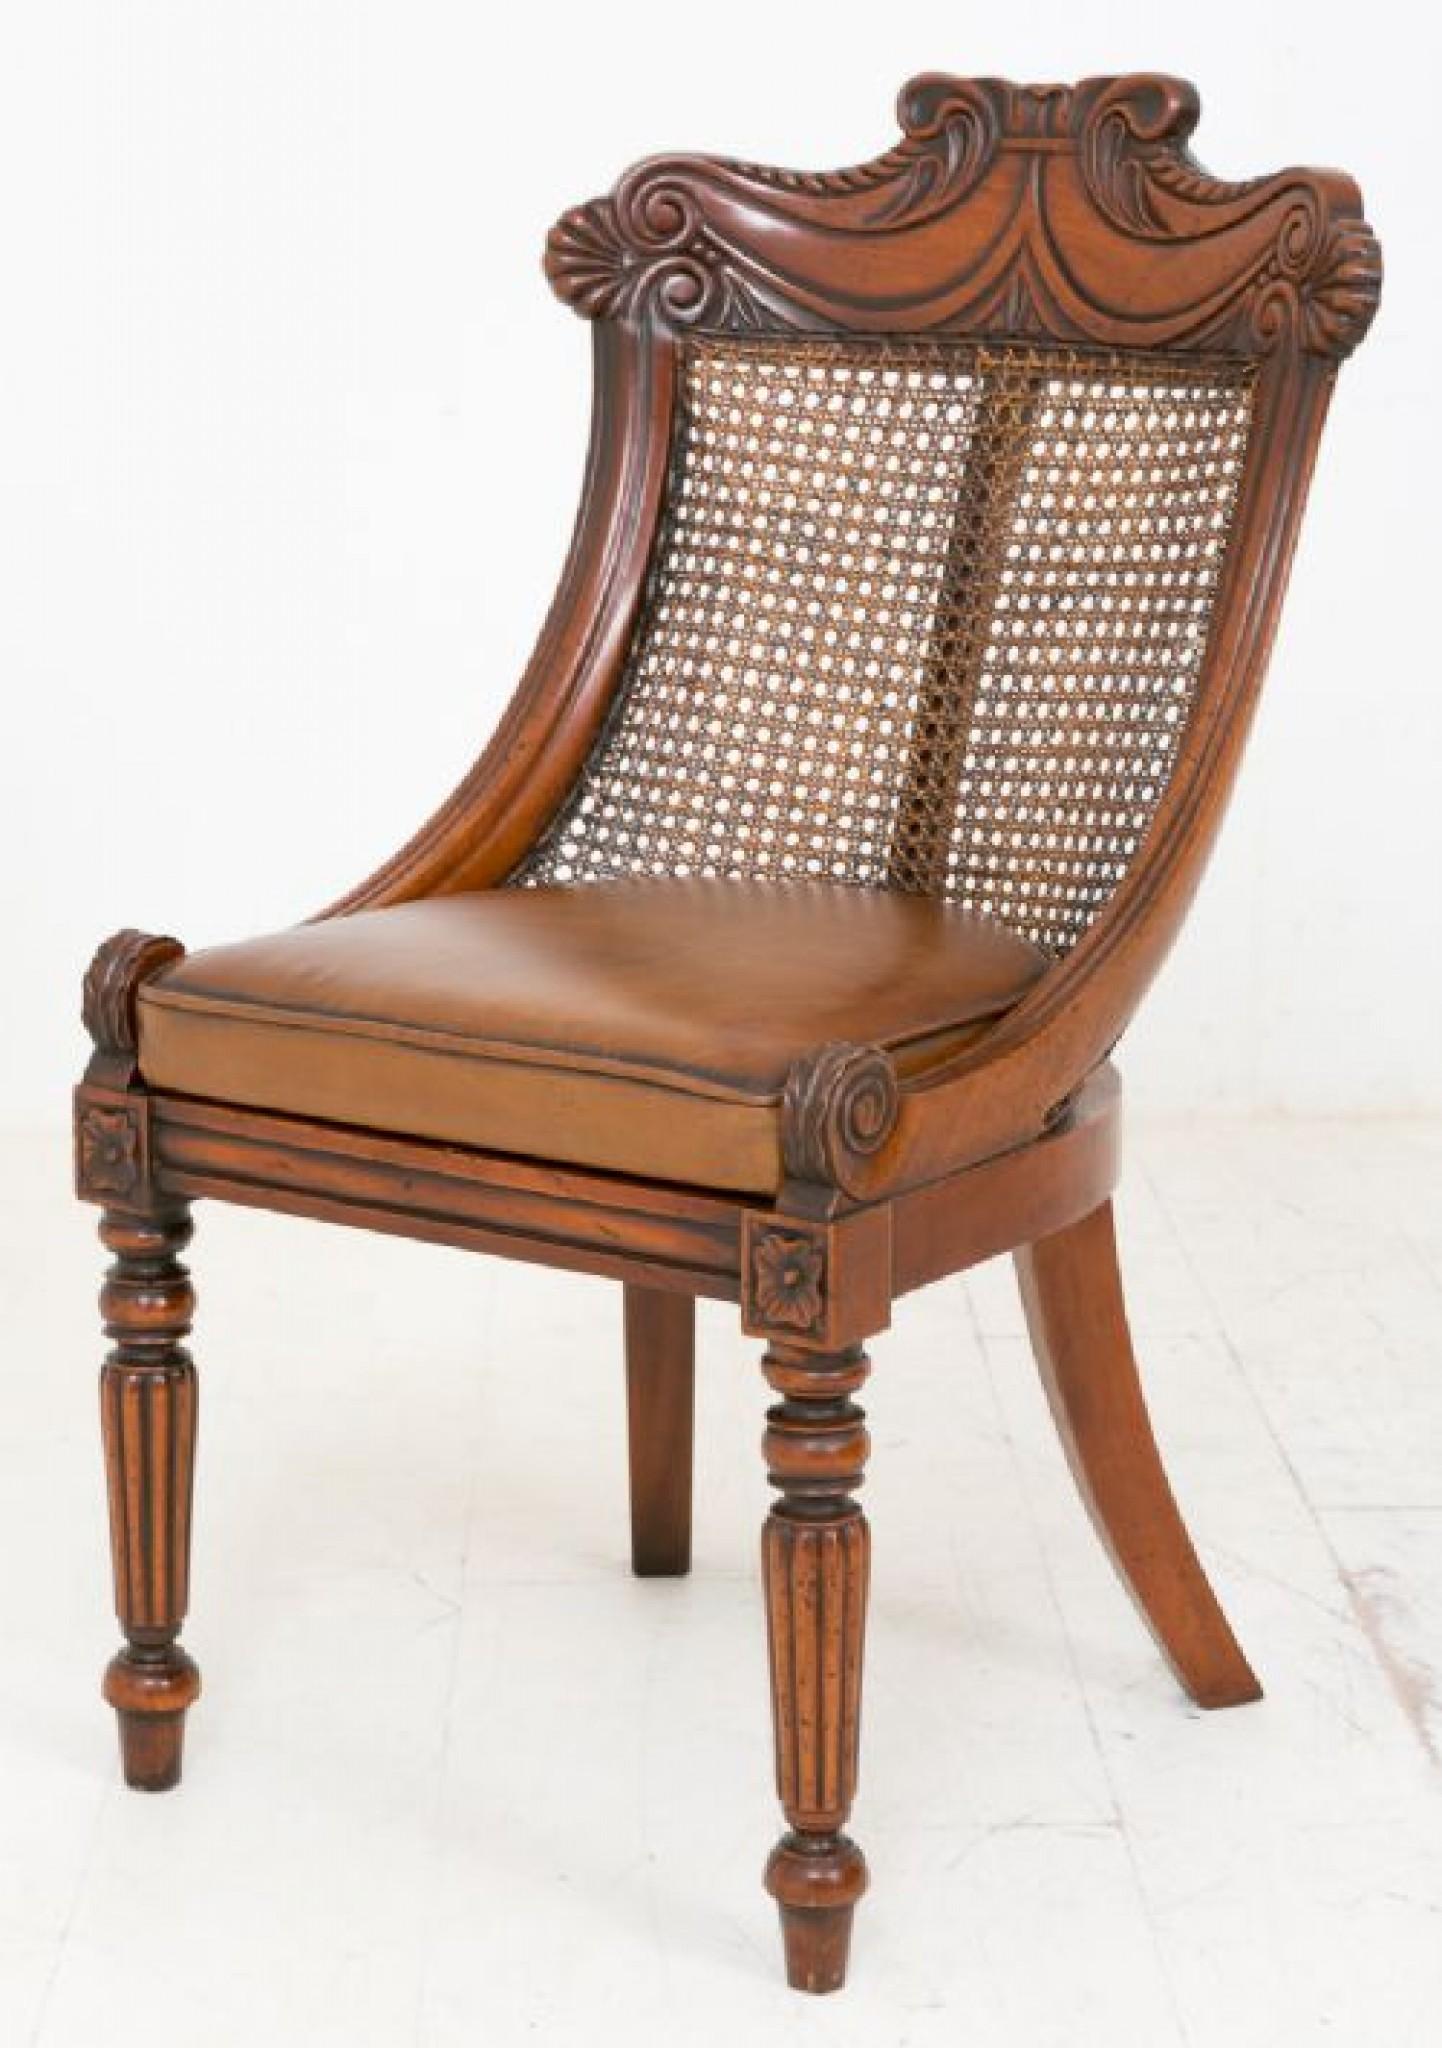 Wonderful Set of 15 Mahogany Regency Style Chairs.
These Chairs stand Upon Crisply Ring Turned and Fluted Front Legs with Sabre Rear Legs.
The Lift out Seat Cushions have Recently been Reupholstered in a Quality Hide.
The Chairs Feature Cane